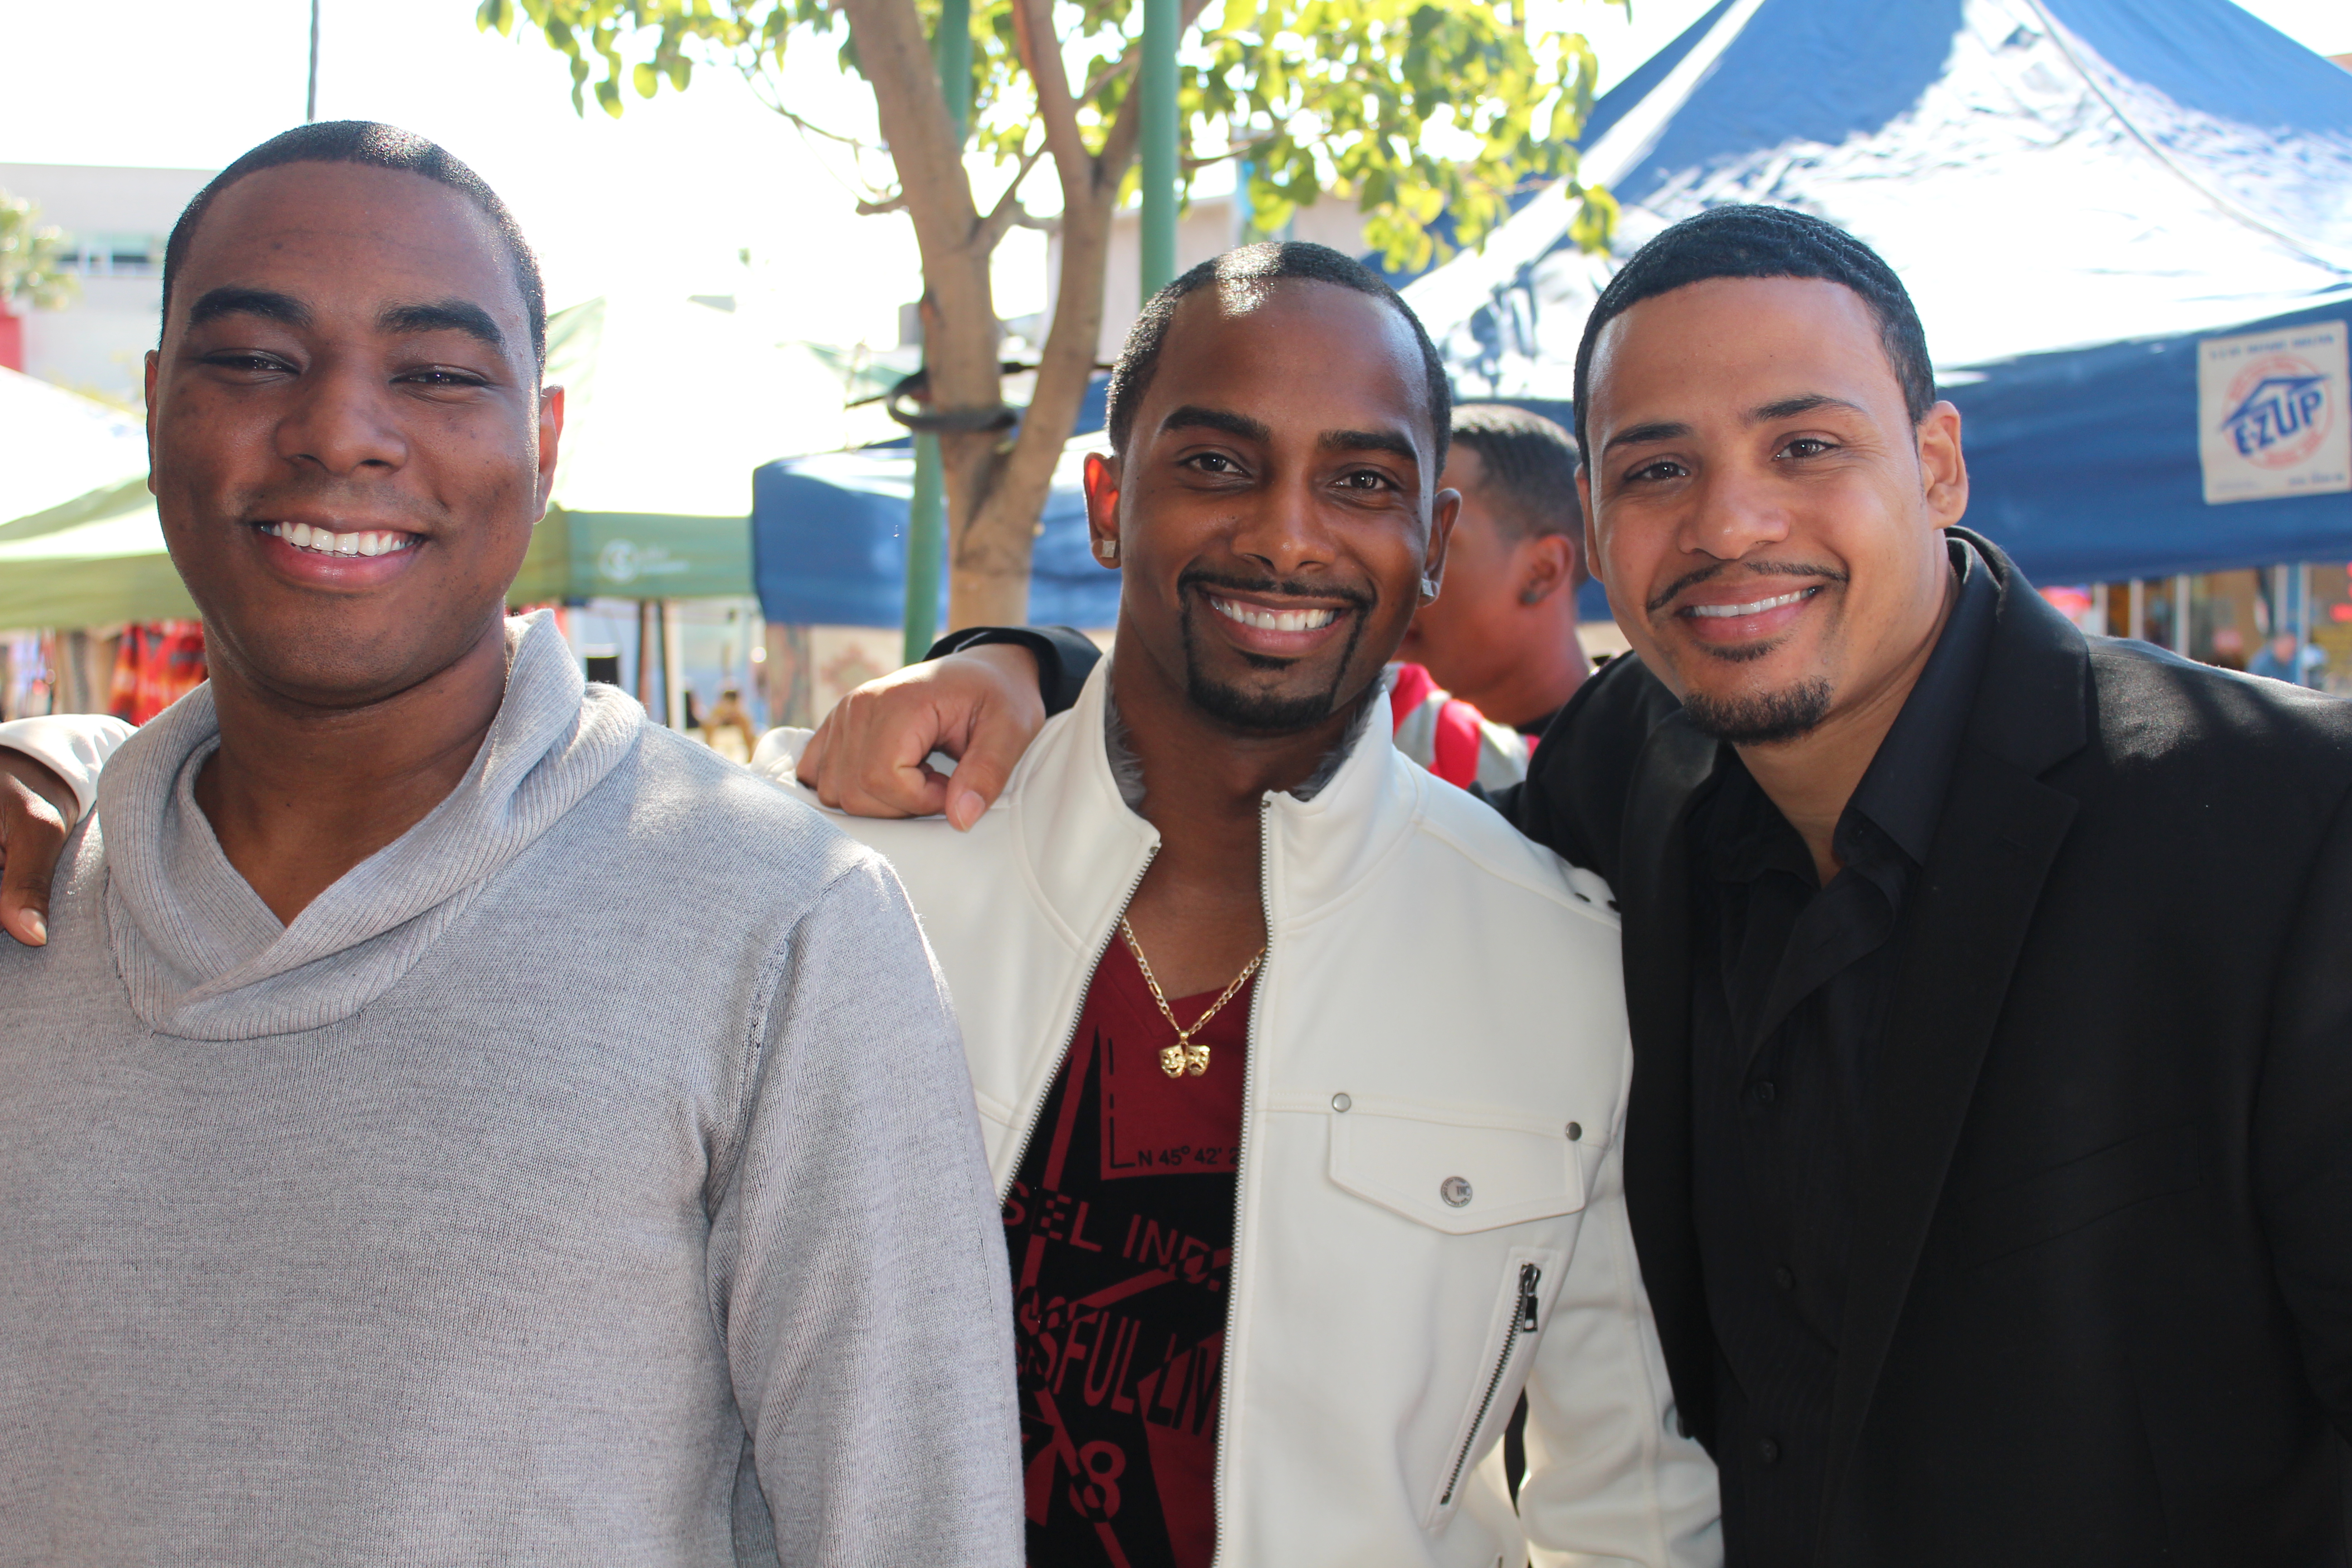 Love Triangle Movie Screening with Byron Smith, Markiss McFadden and Cardell Jackson.